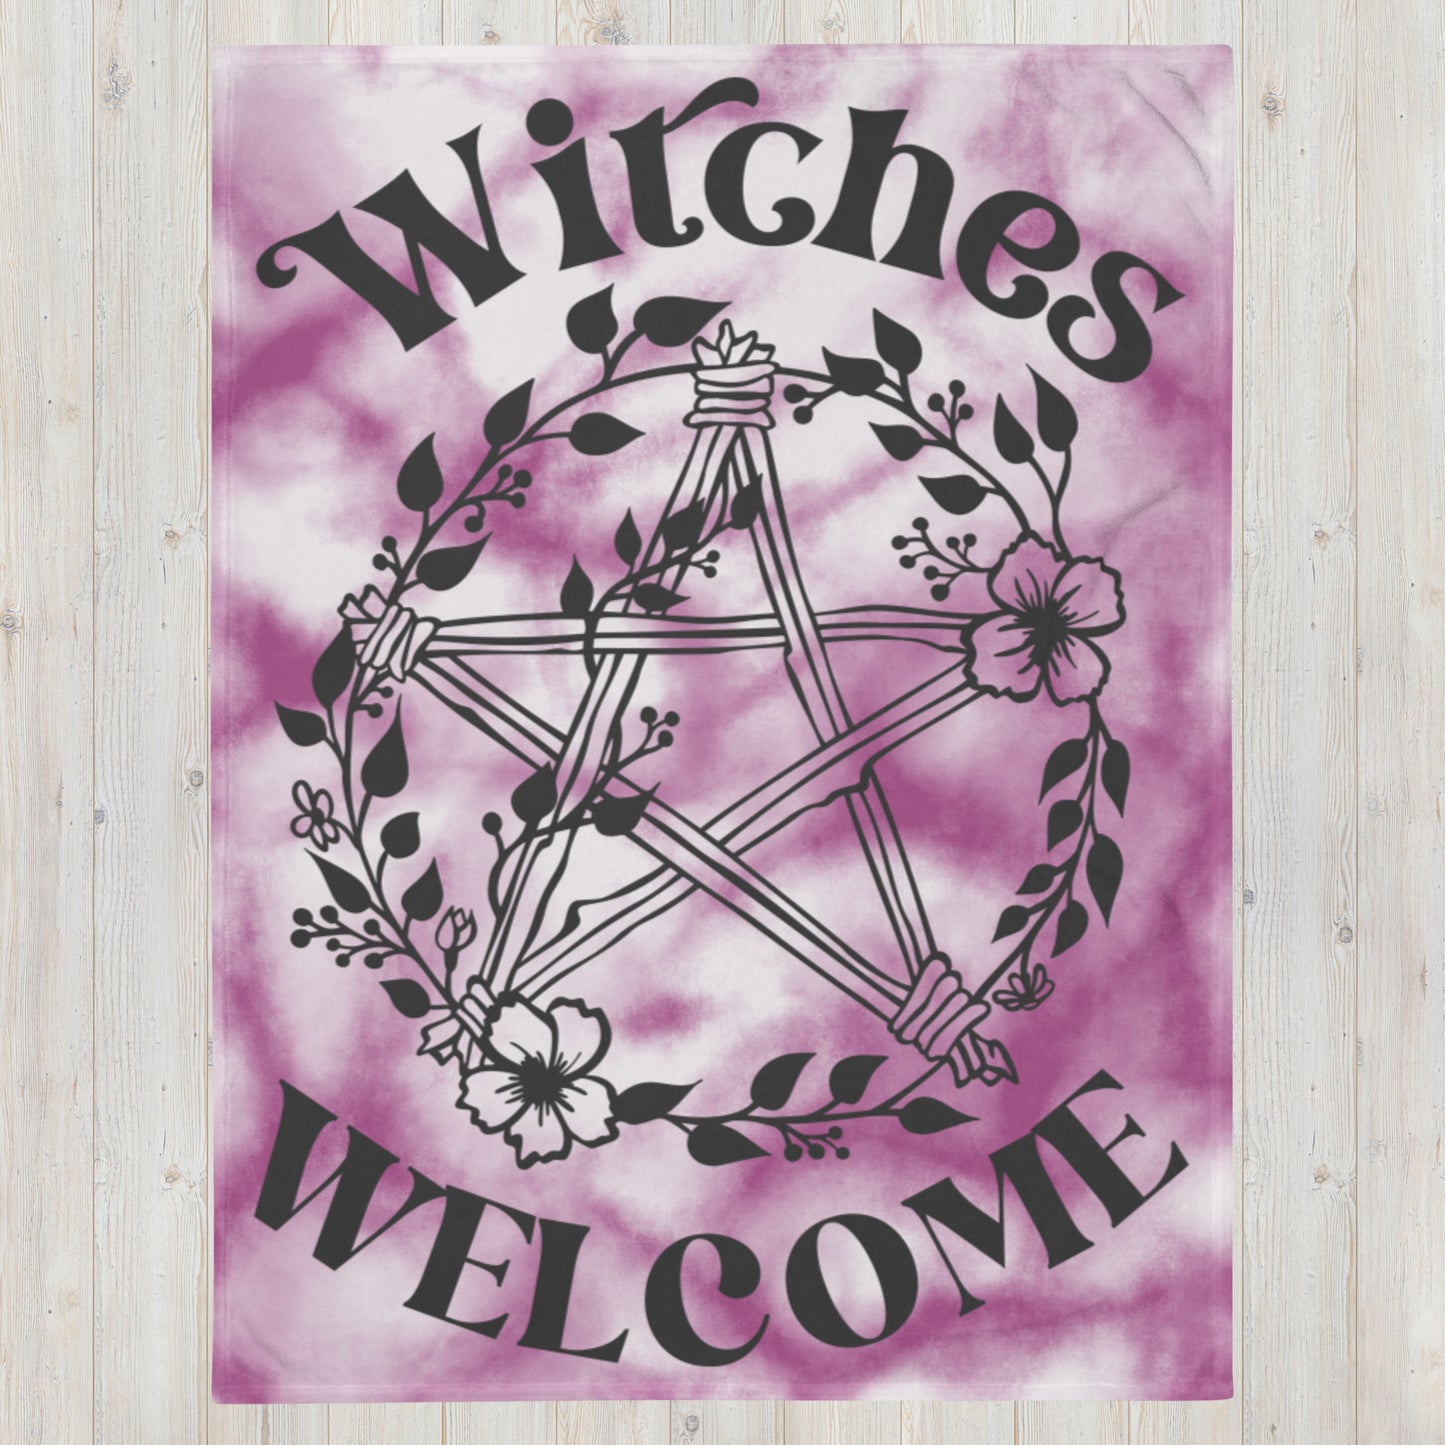 WITCHES WELCOME- Throw Blanket